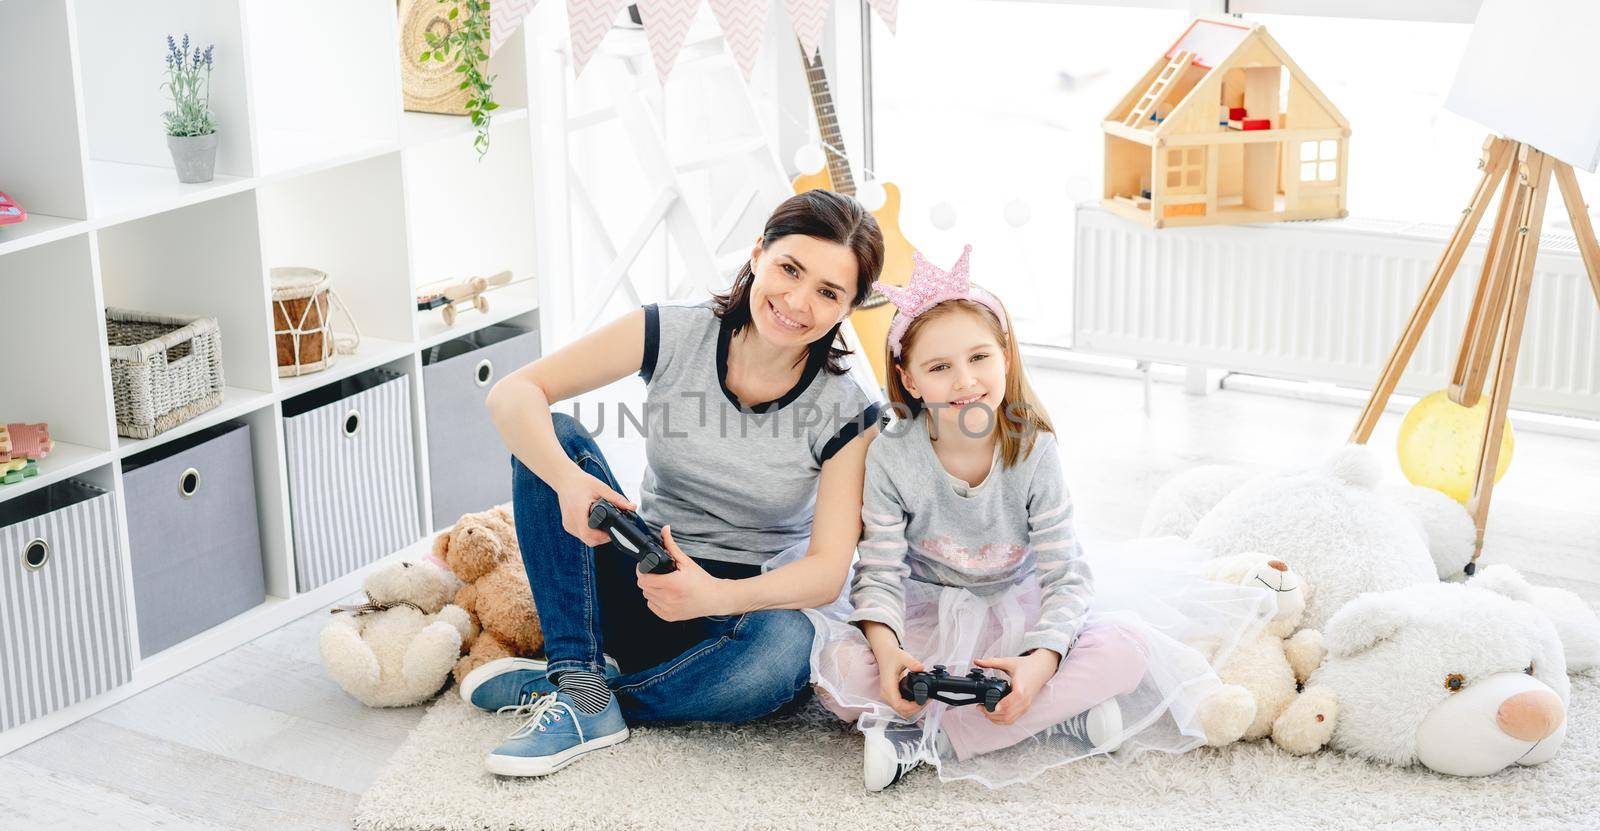 Cute little girl playing video game with mother in playroom